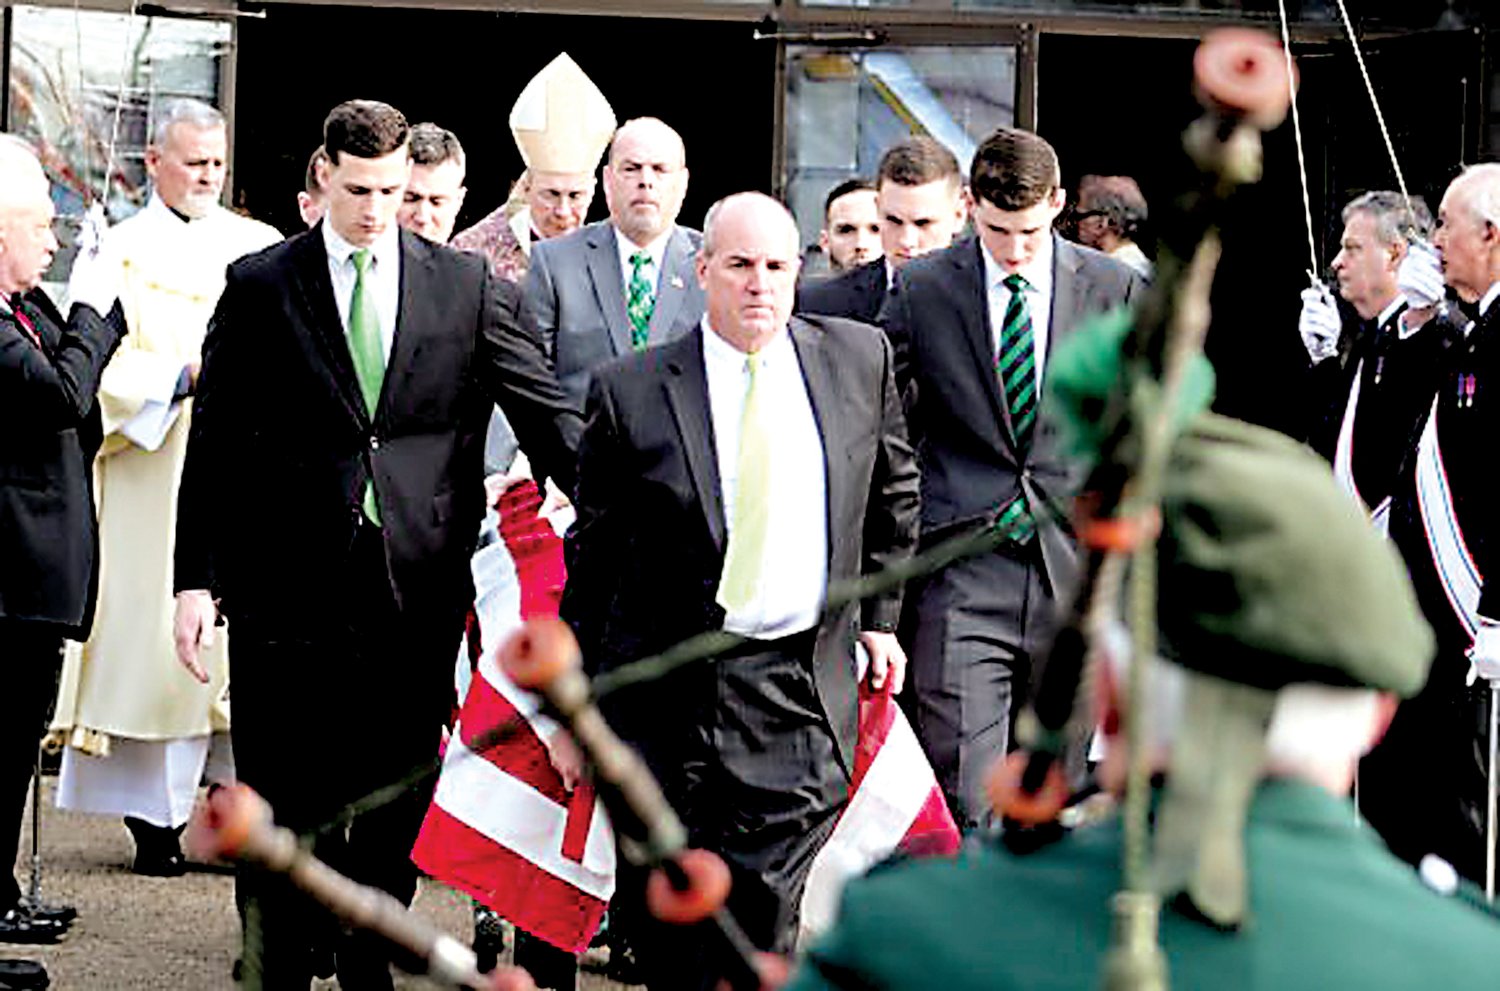 With bagpipes playing, Mike Fitzpatrick’s casket is carried from Queen of the Universe Church to be transported to Washington Crossing National Cemetery for burial. Photograph by Tom Sofield, LevittownNow.com.